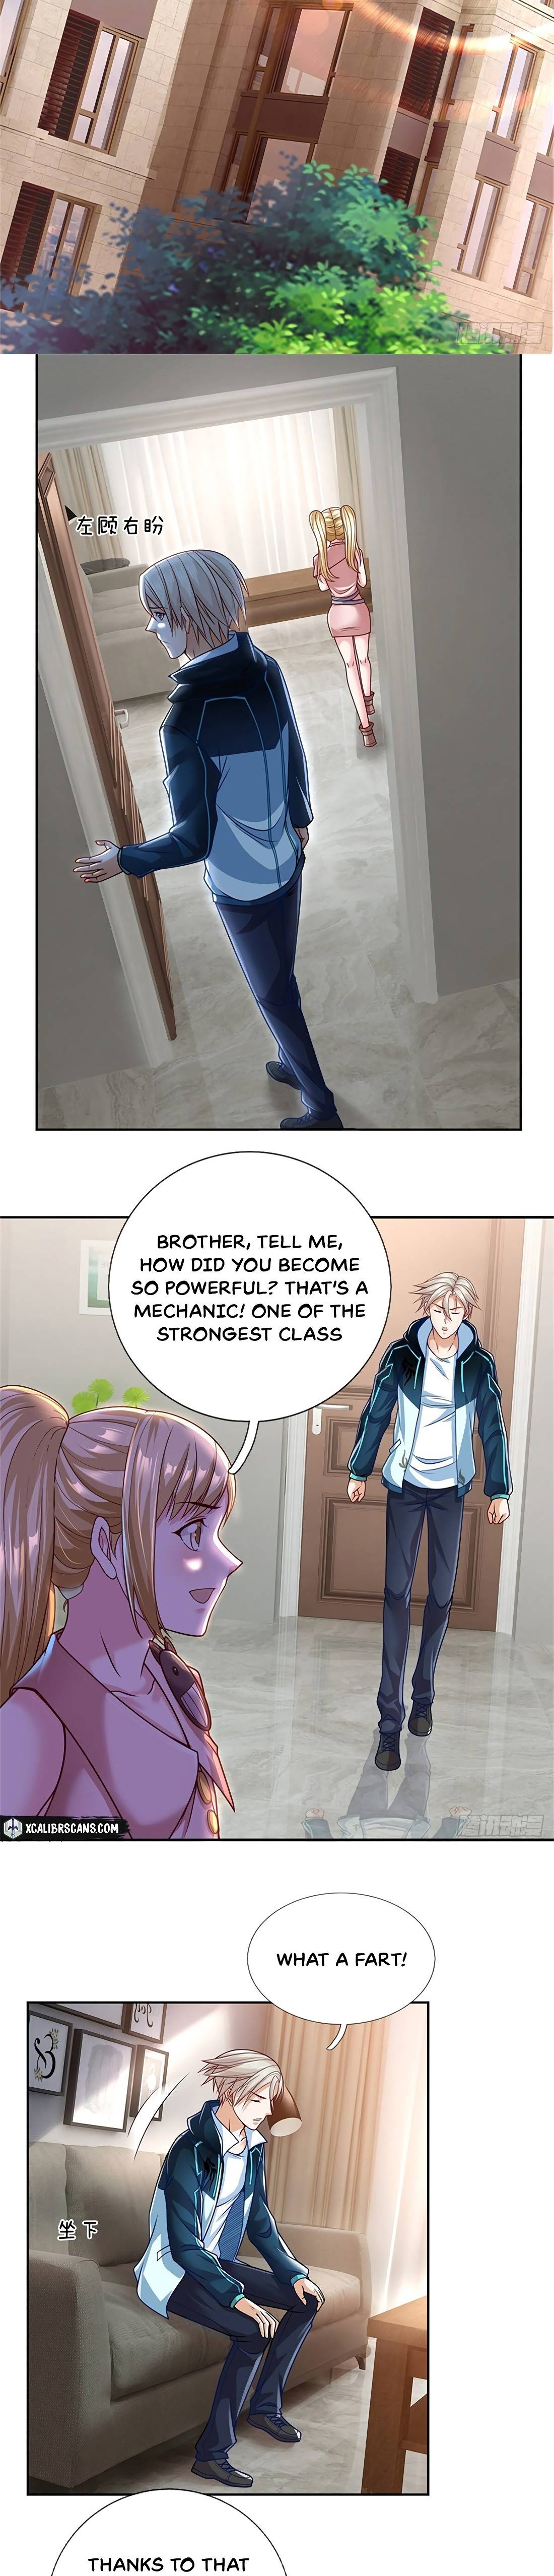 The Strongest Seal Master - Page 3